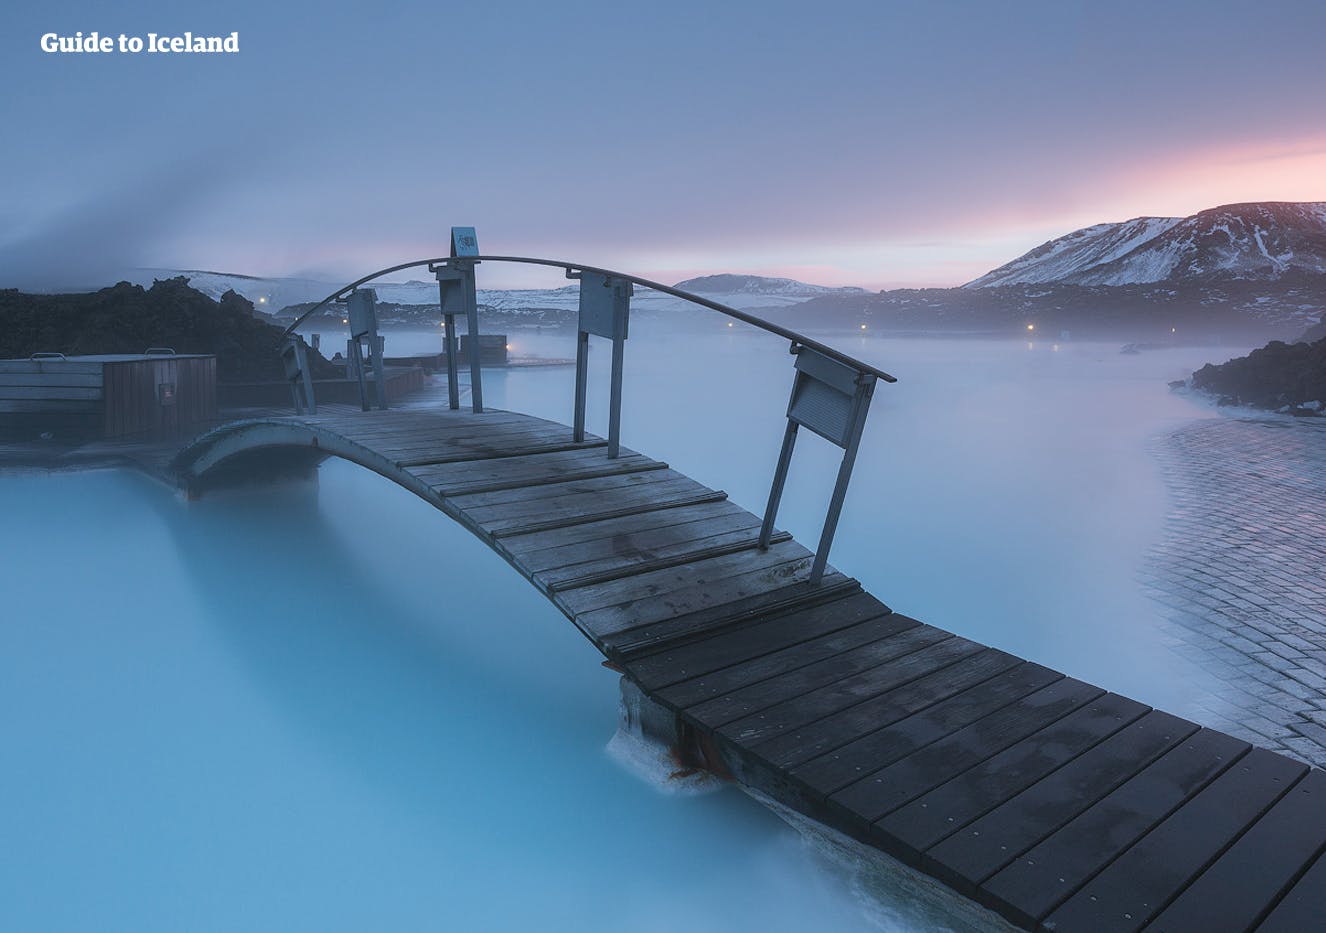 End your Iceland adventure perfectly with a dip in the Blue Lagoon geothermal spa.